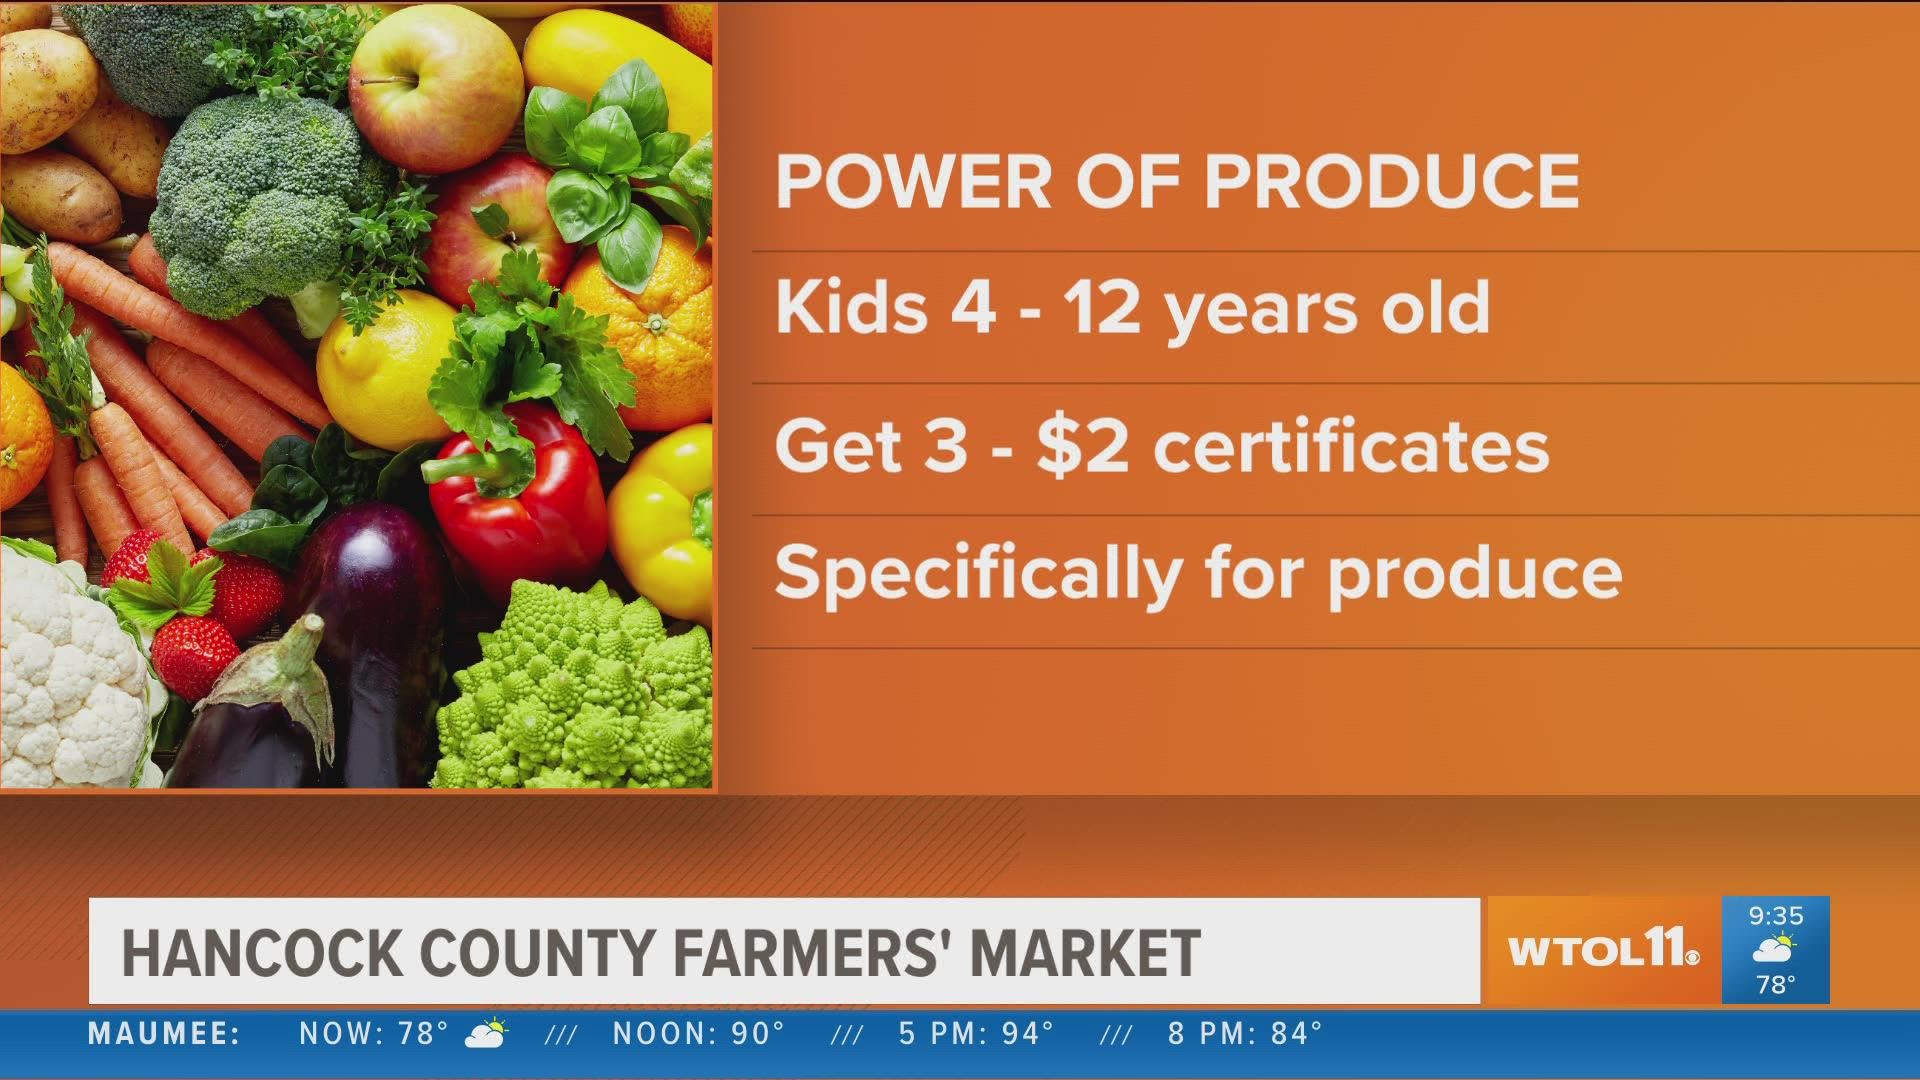 The Hancock county farmers market is offering a program that will give vouchers for kids to buy $6 worth of fruits and veggies for free.